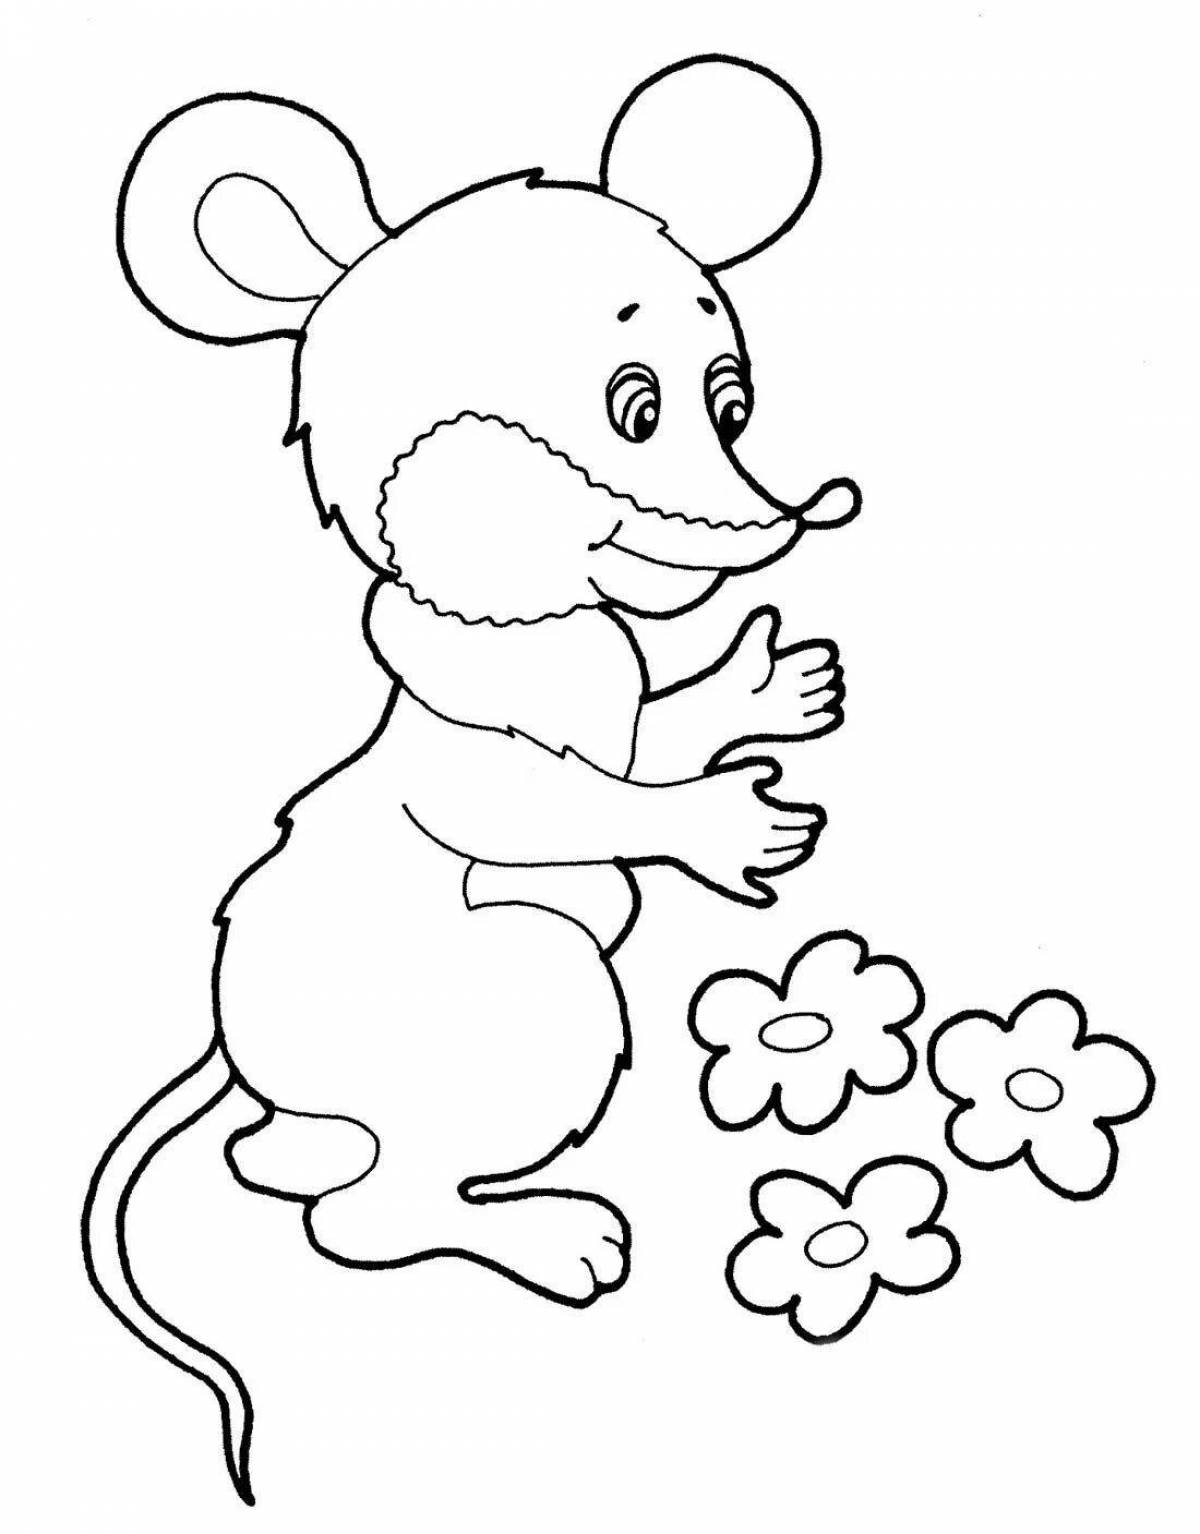 Adorable turnip beetle coloring page